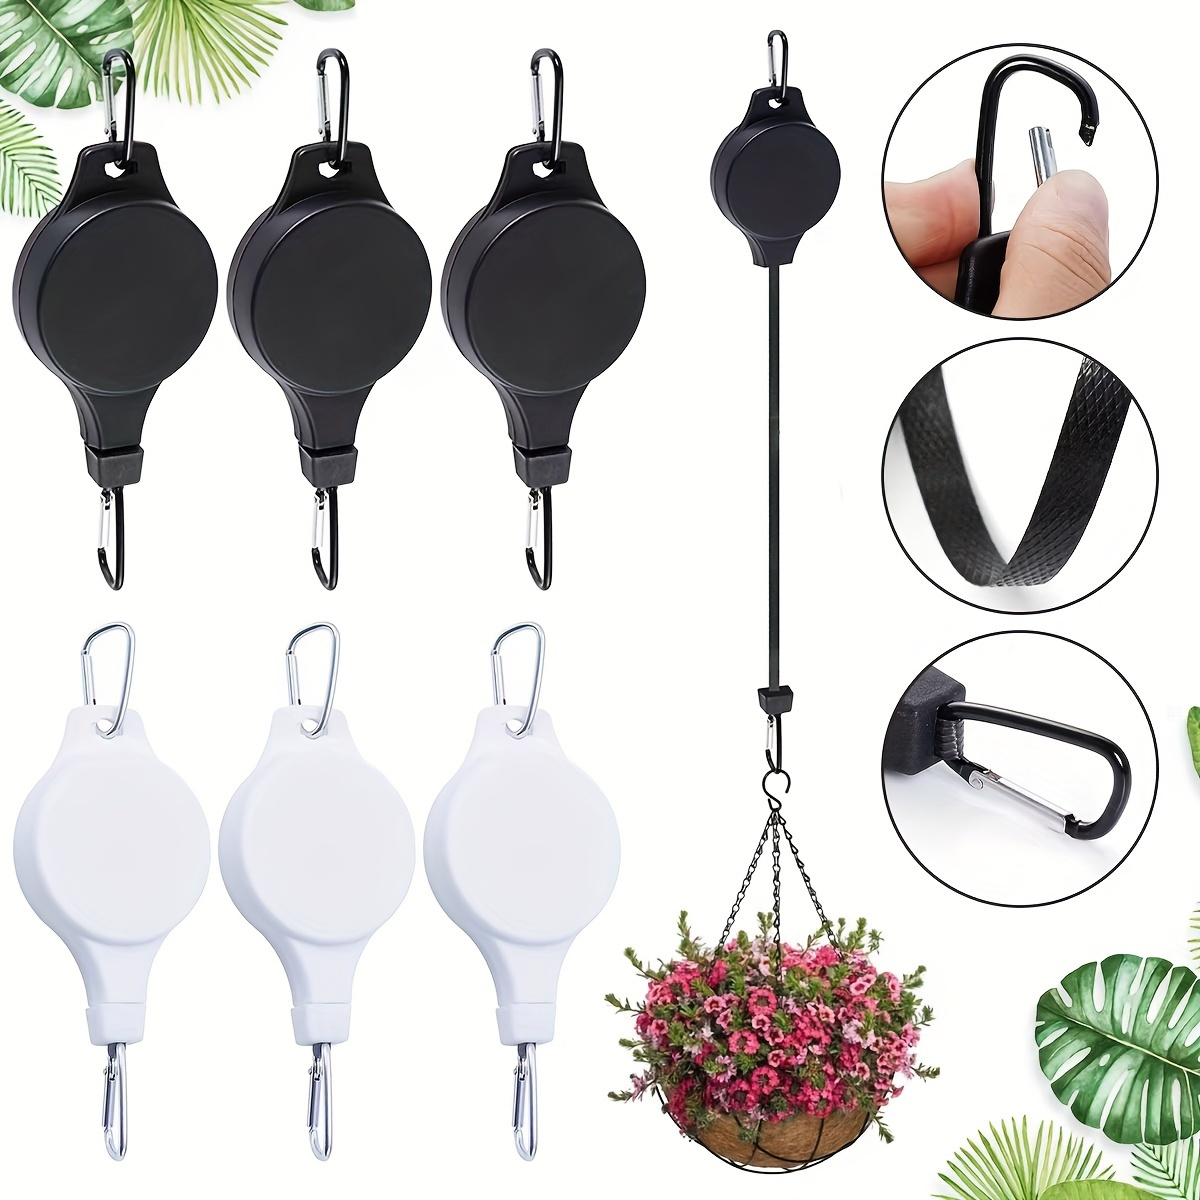 

2pcs Retractable Plant Hangers, Black Heavy Duty Easy Reach Pulley For Hanging Pots & Bird Feeders, Adjustable Height Wheels, Indoor/outdoor Garden Basket Pulley System, Casual Style